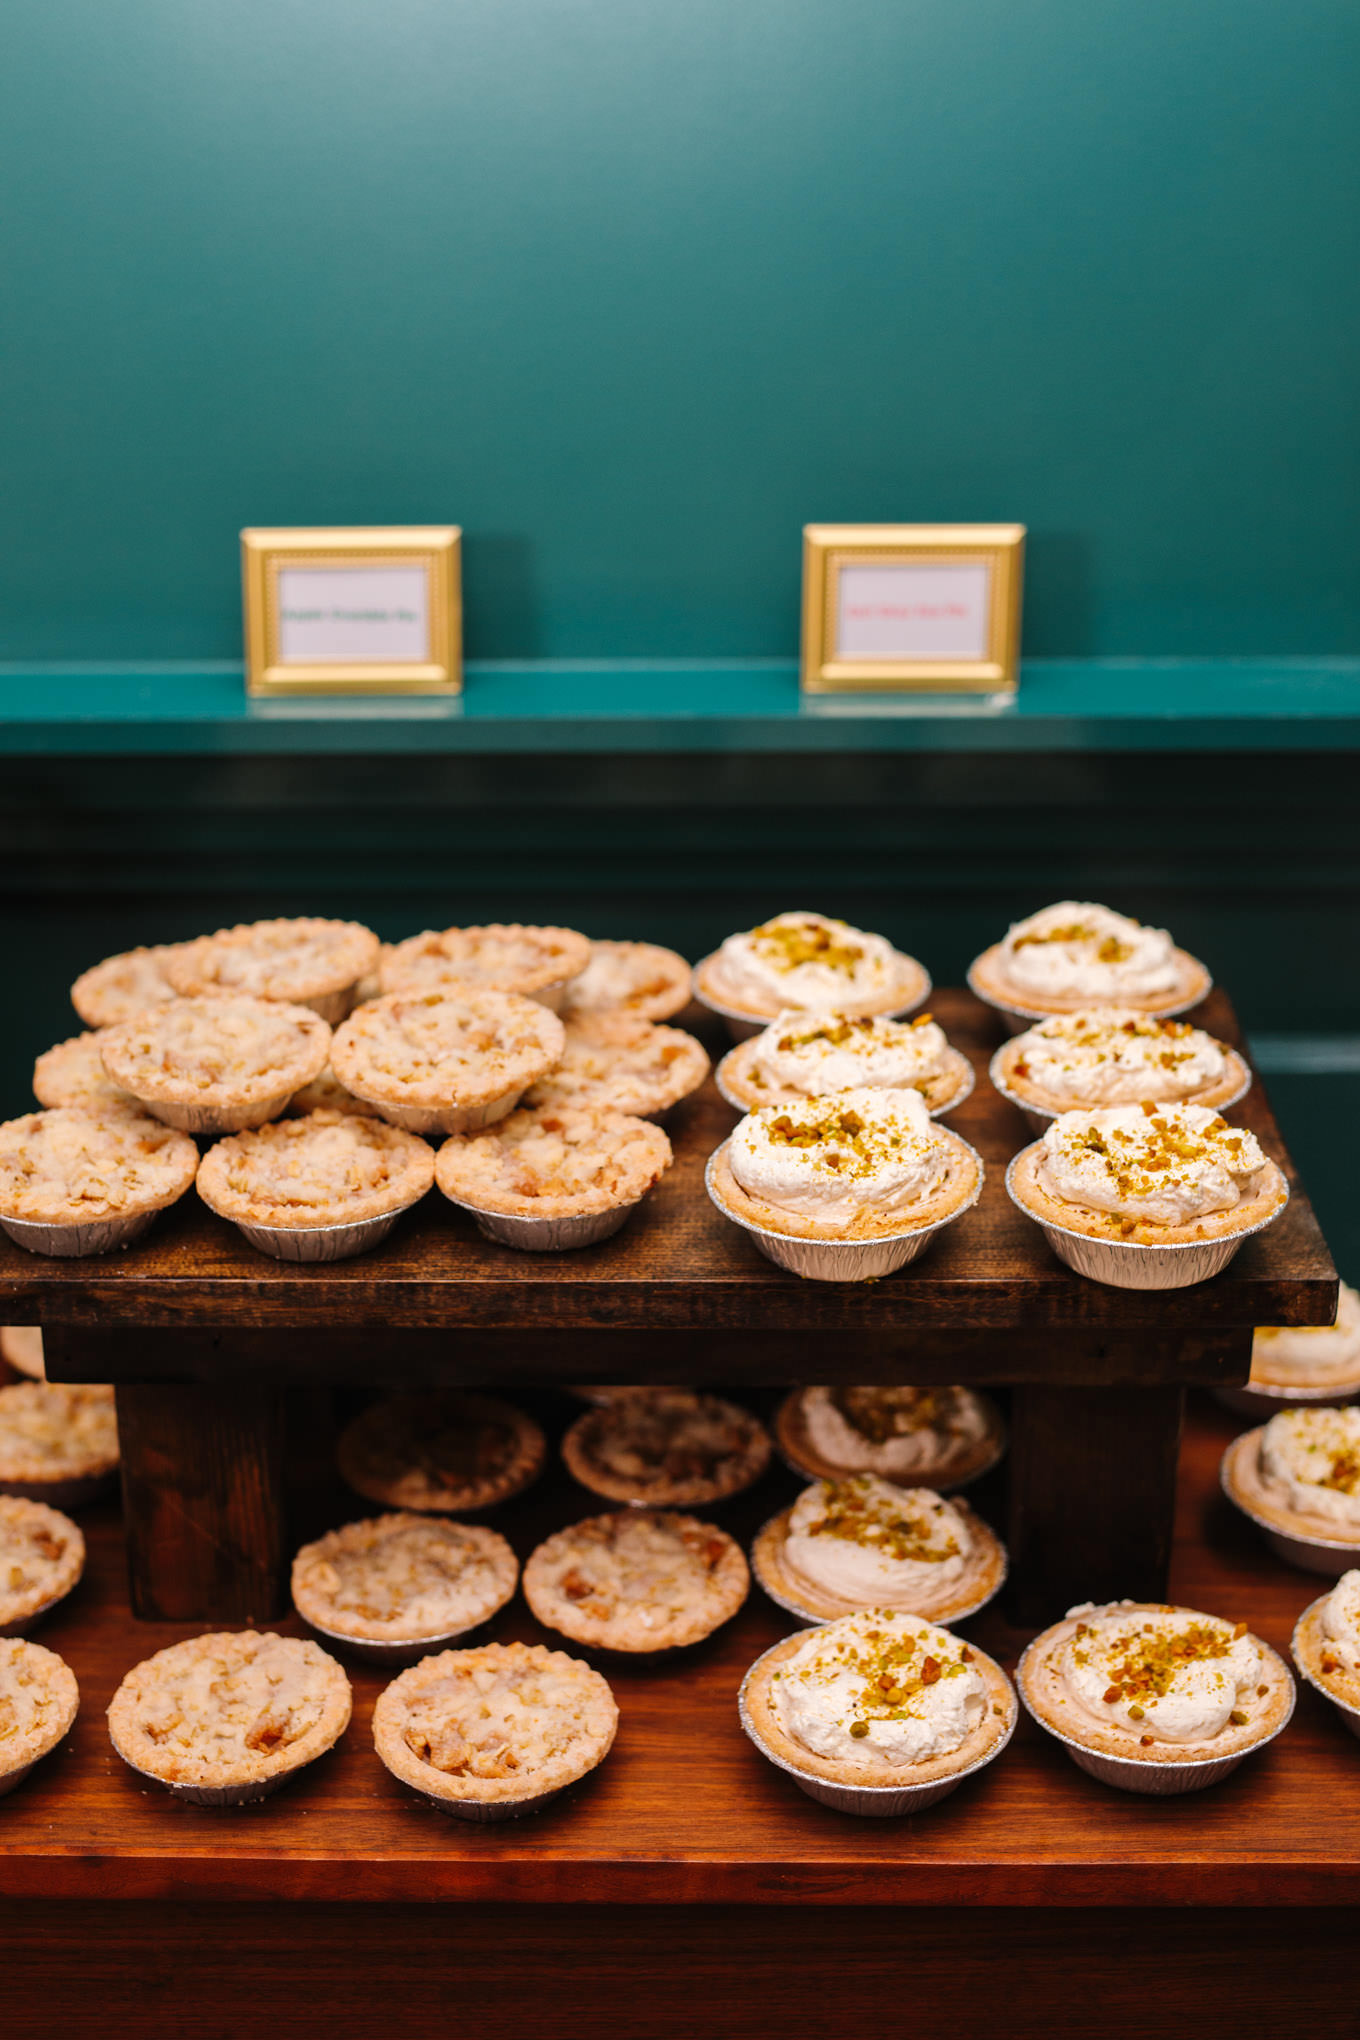 Mini pies at wedding reception | TV inspired wedding at The Fig House Los Angeles | Published on The Knot | Fresh and colorful photography for fun-loving couples in Southern California | #losangeleswedding #TVwedding #colorfulwedding #theknot   Source: Mary Costa Photography | Los Angeles wedding photographer